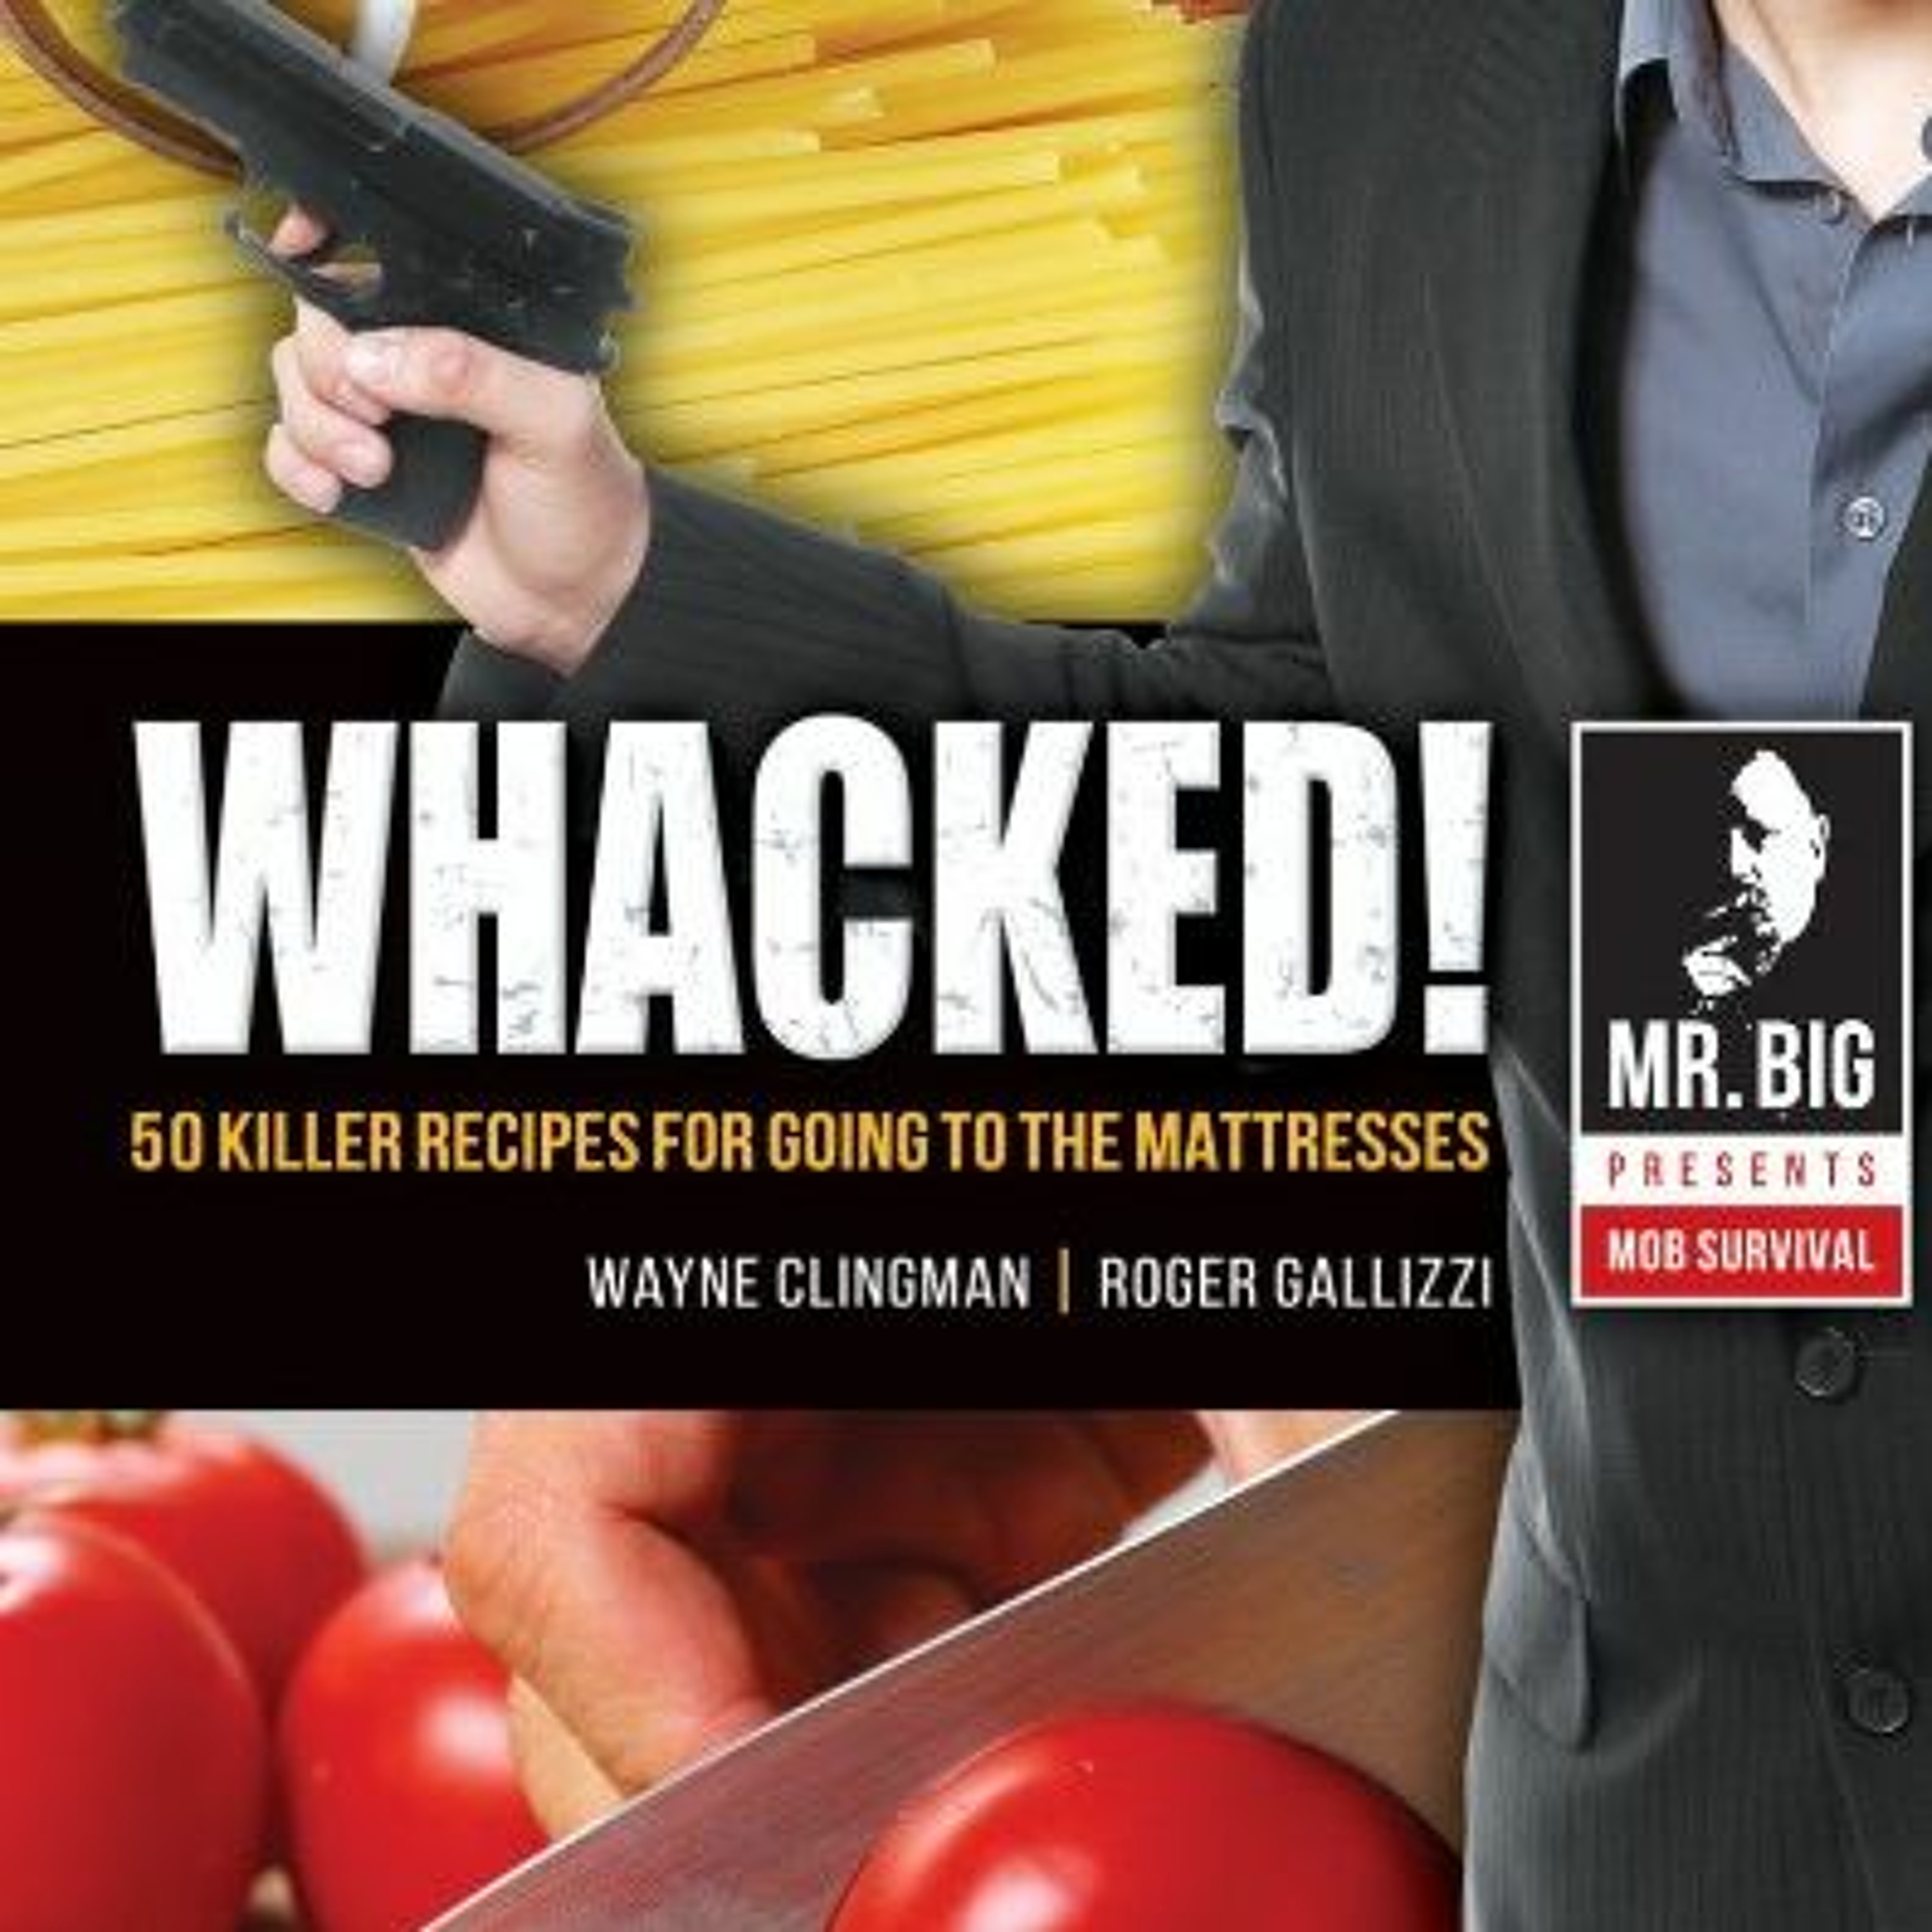 ”Whacked: 50 Killer Recipes For Going To The Mattresses” - The Complete Roger Gallizzi Interview